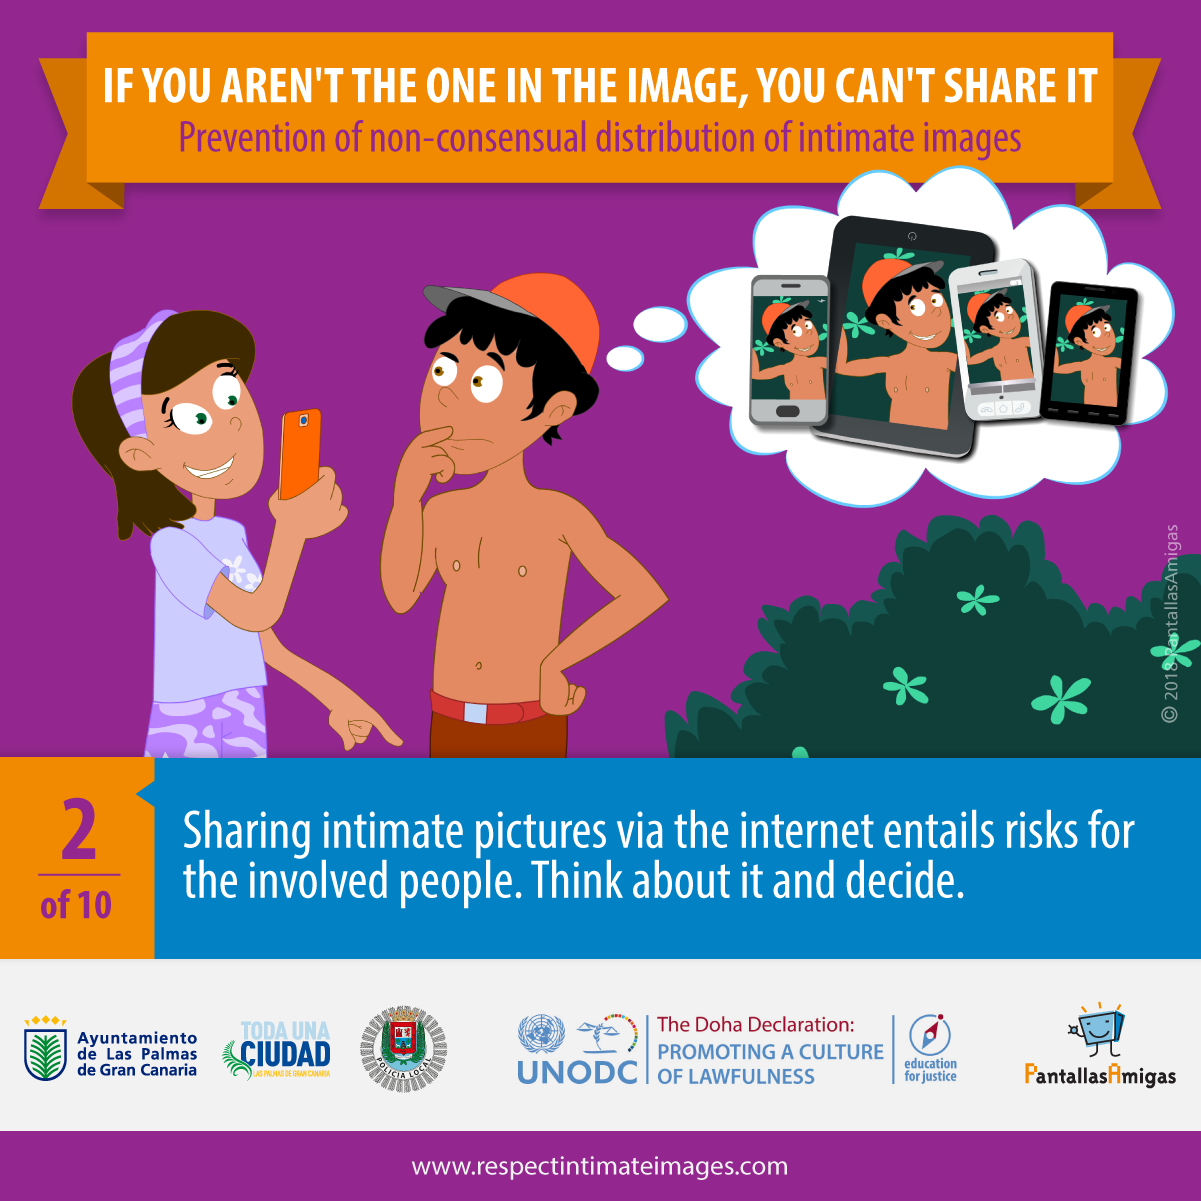 Sharing intimate pictures via the internet entails risks for the involved people. Think about it and decide.